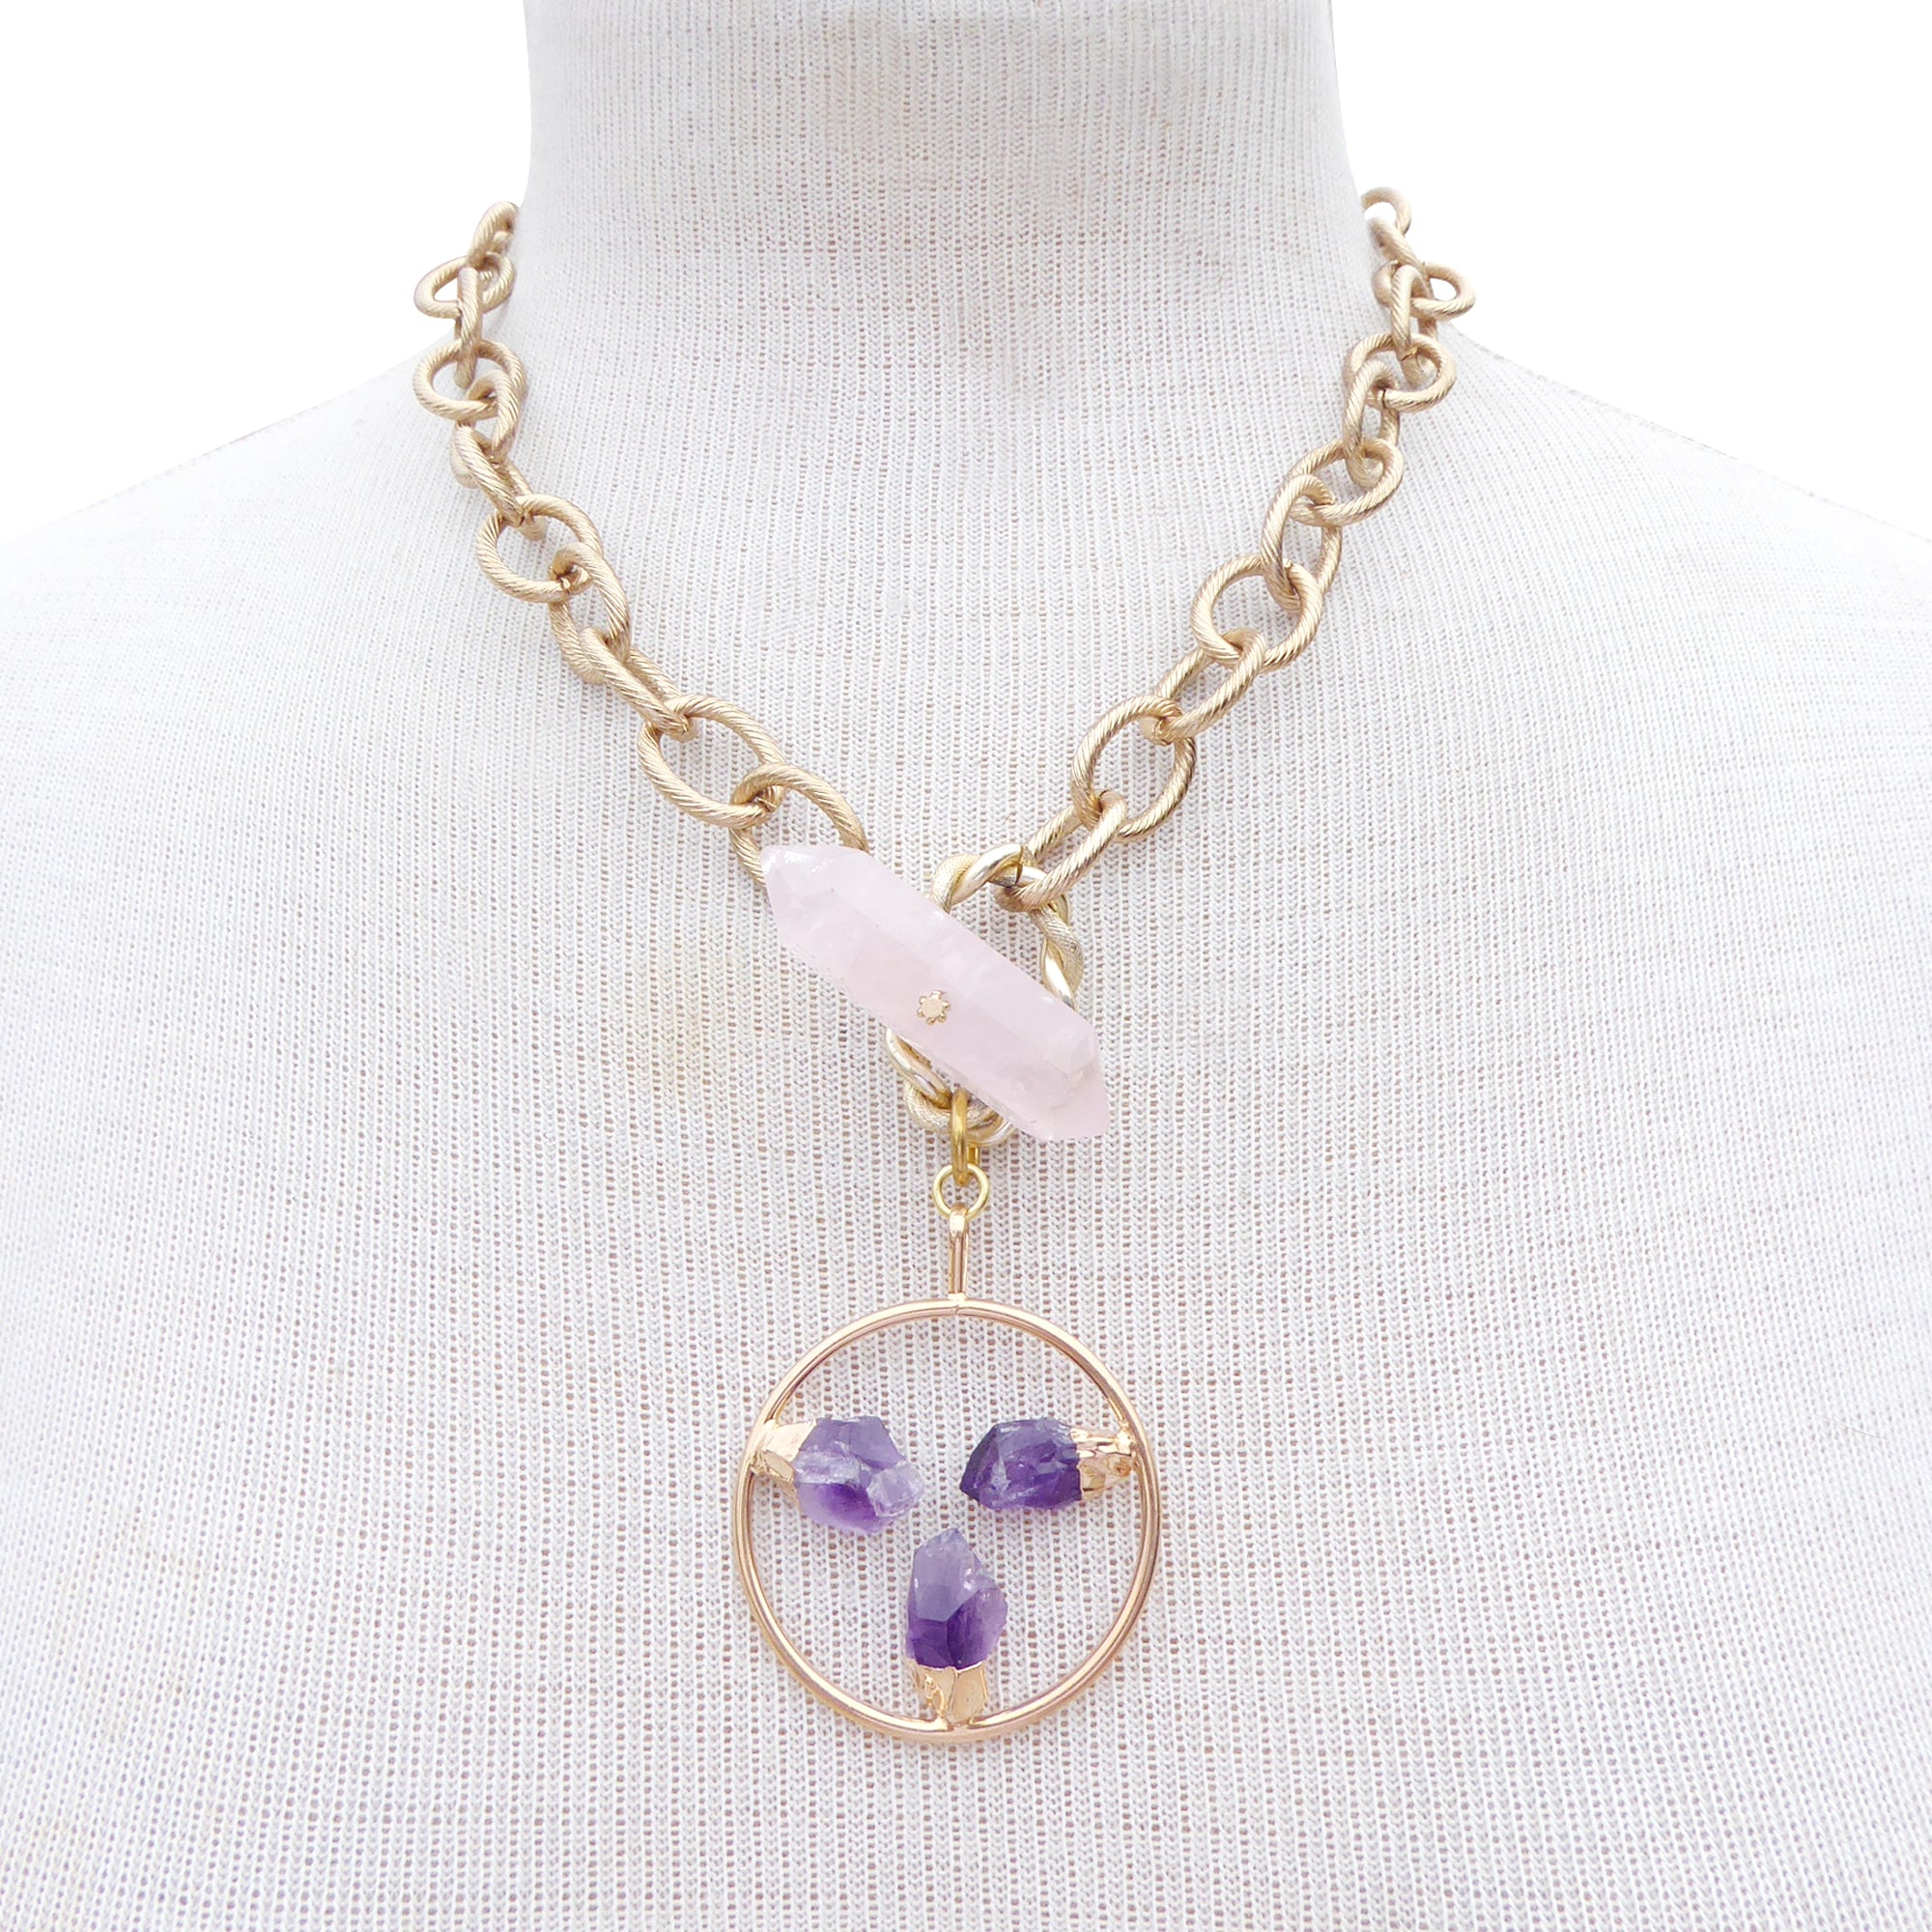 Amethyst triple point toggle necklace